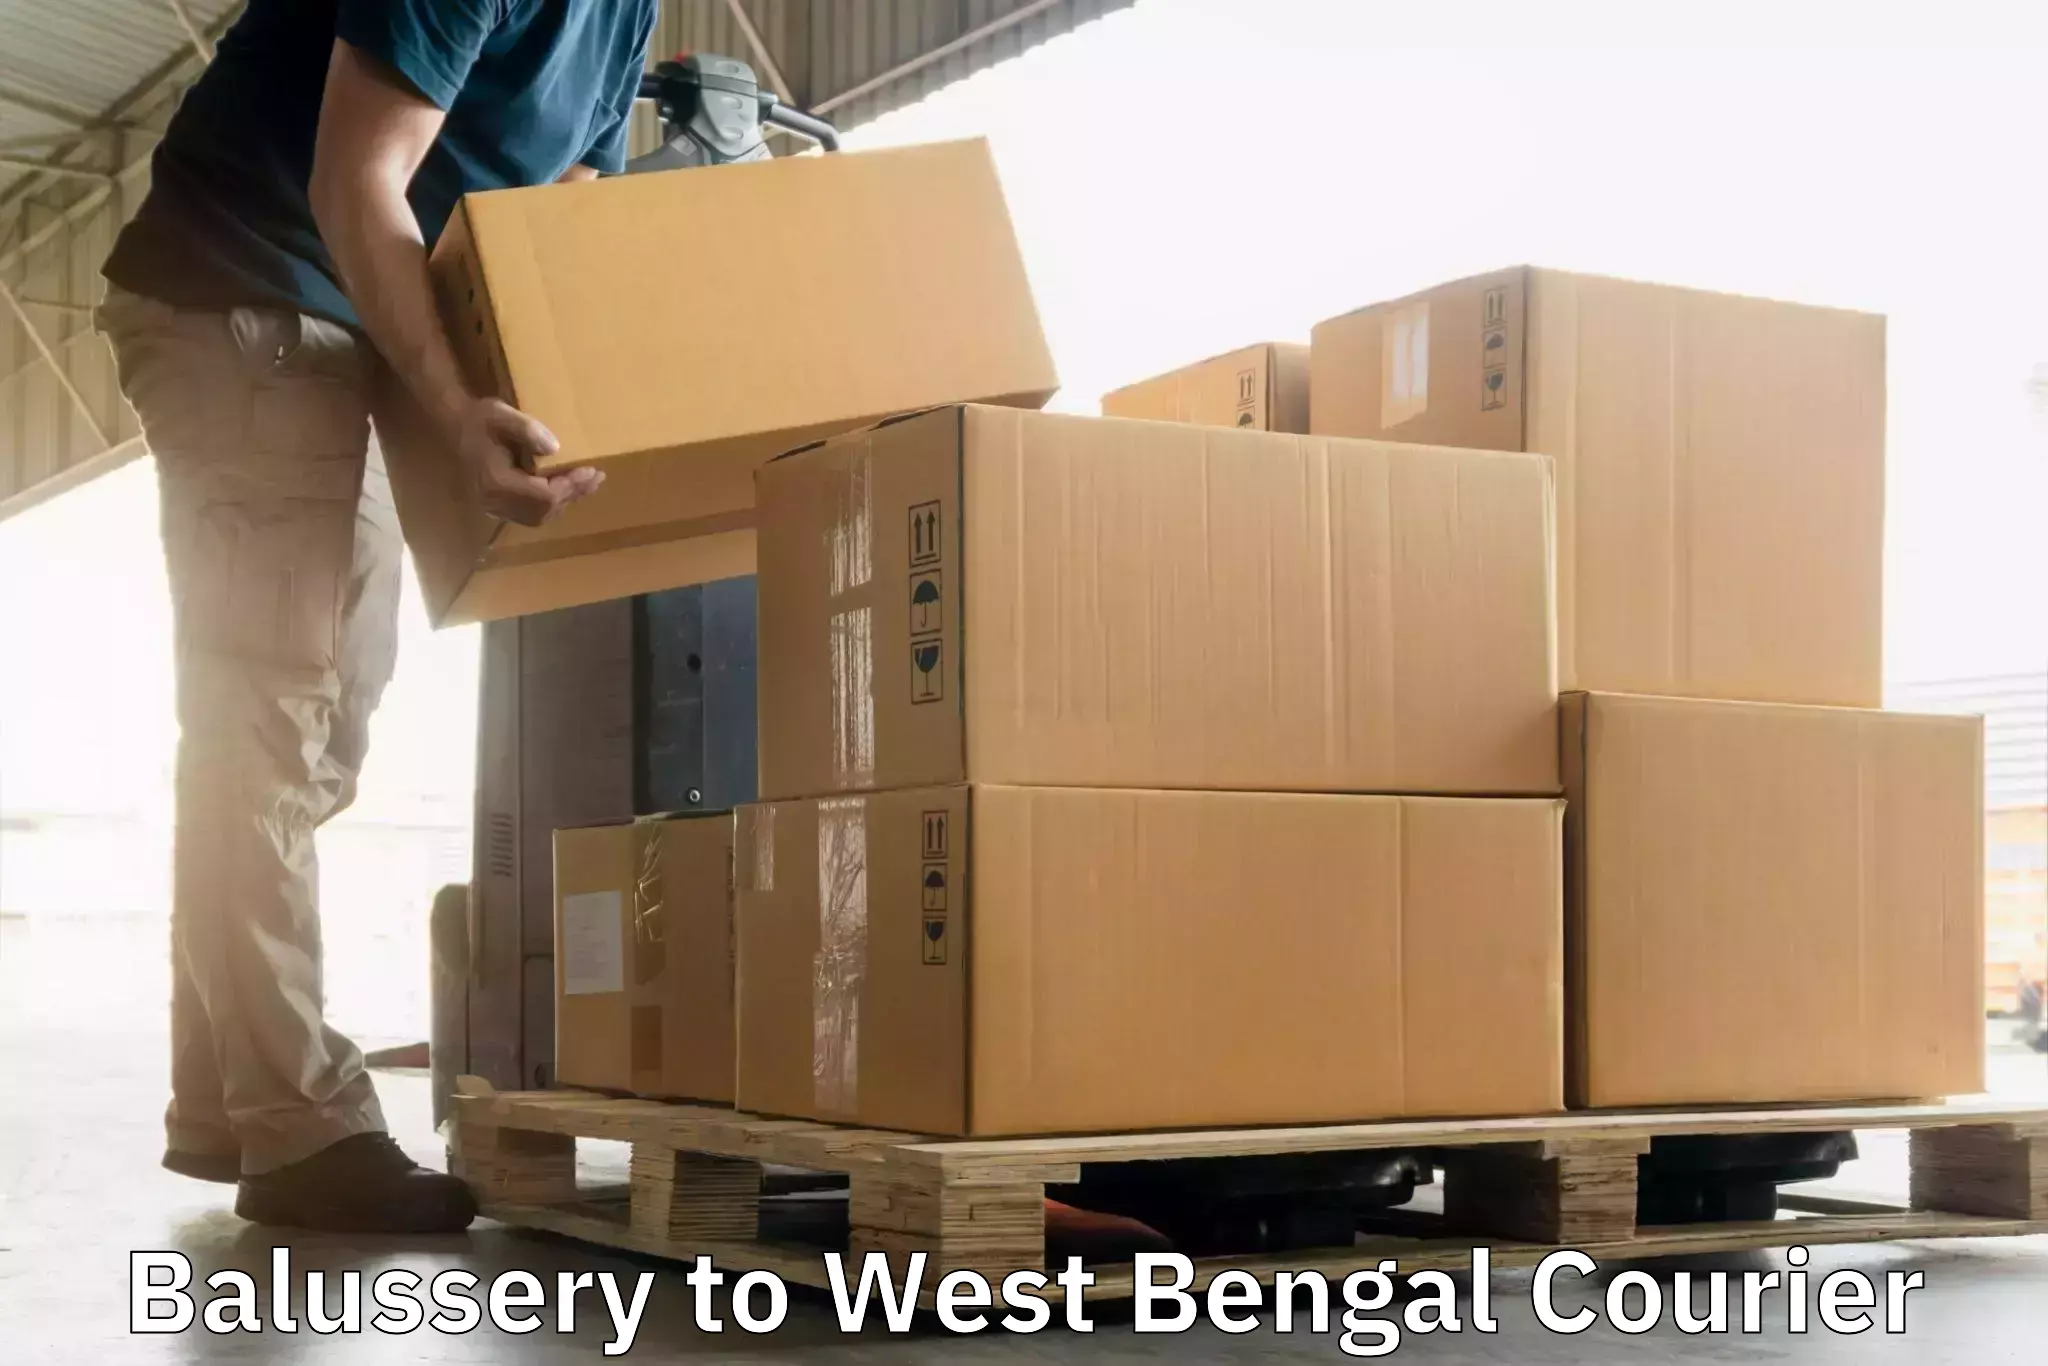 Express delivery network Balussery to Paschim Medinipur